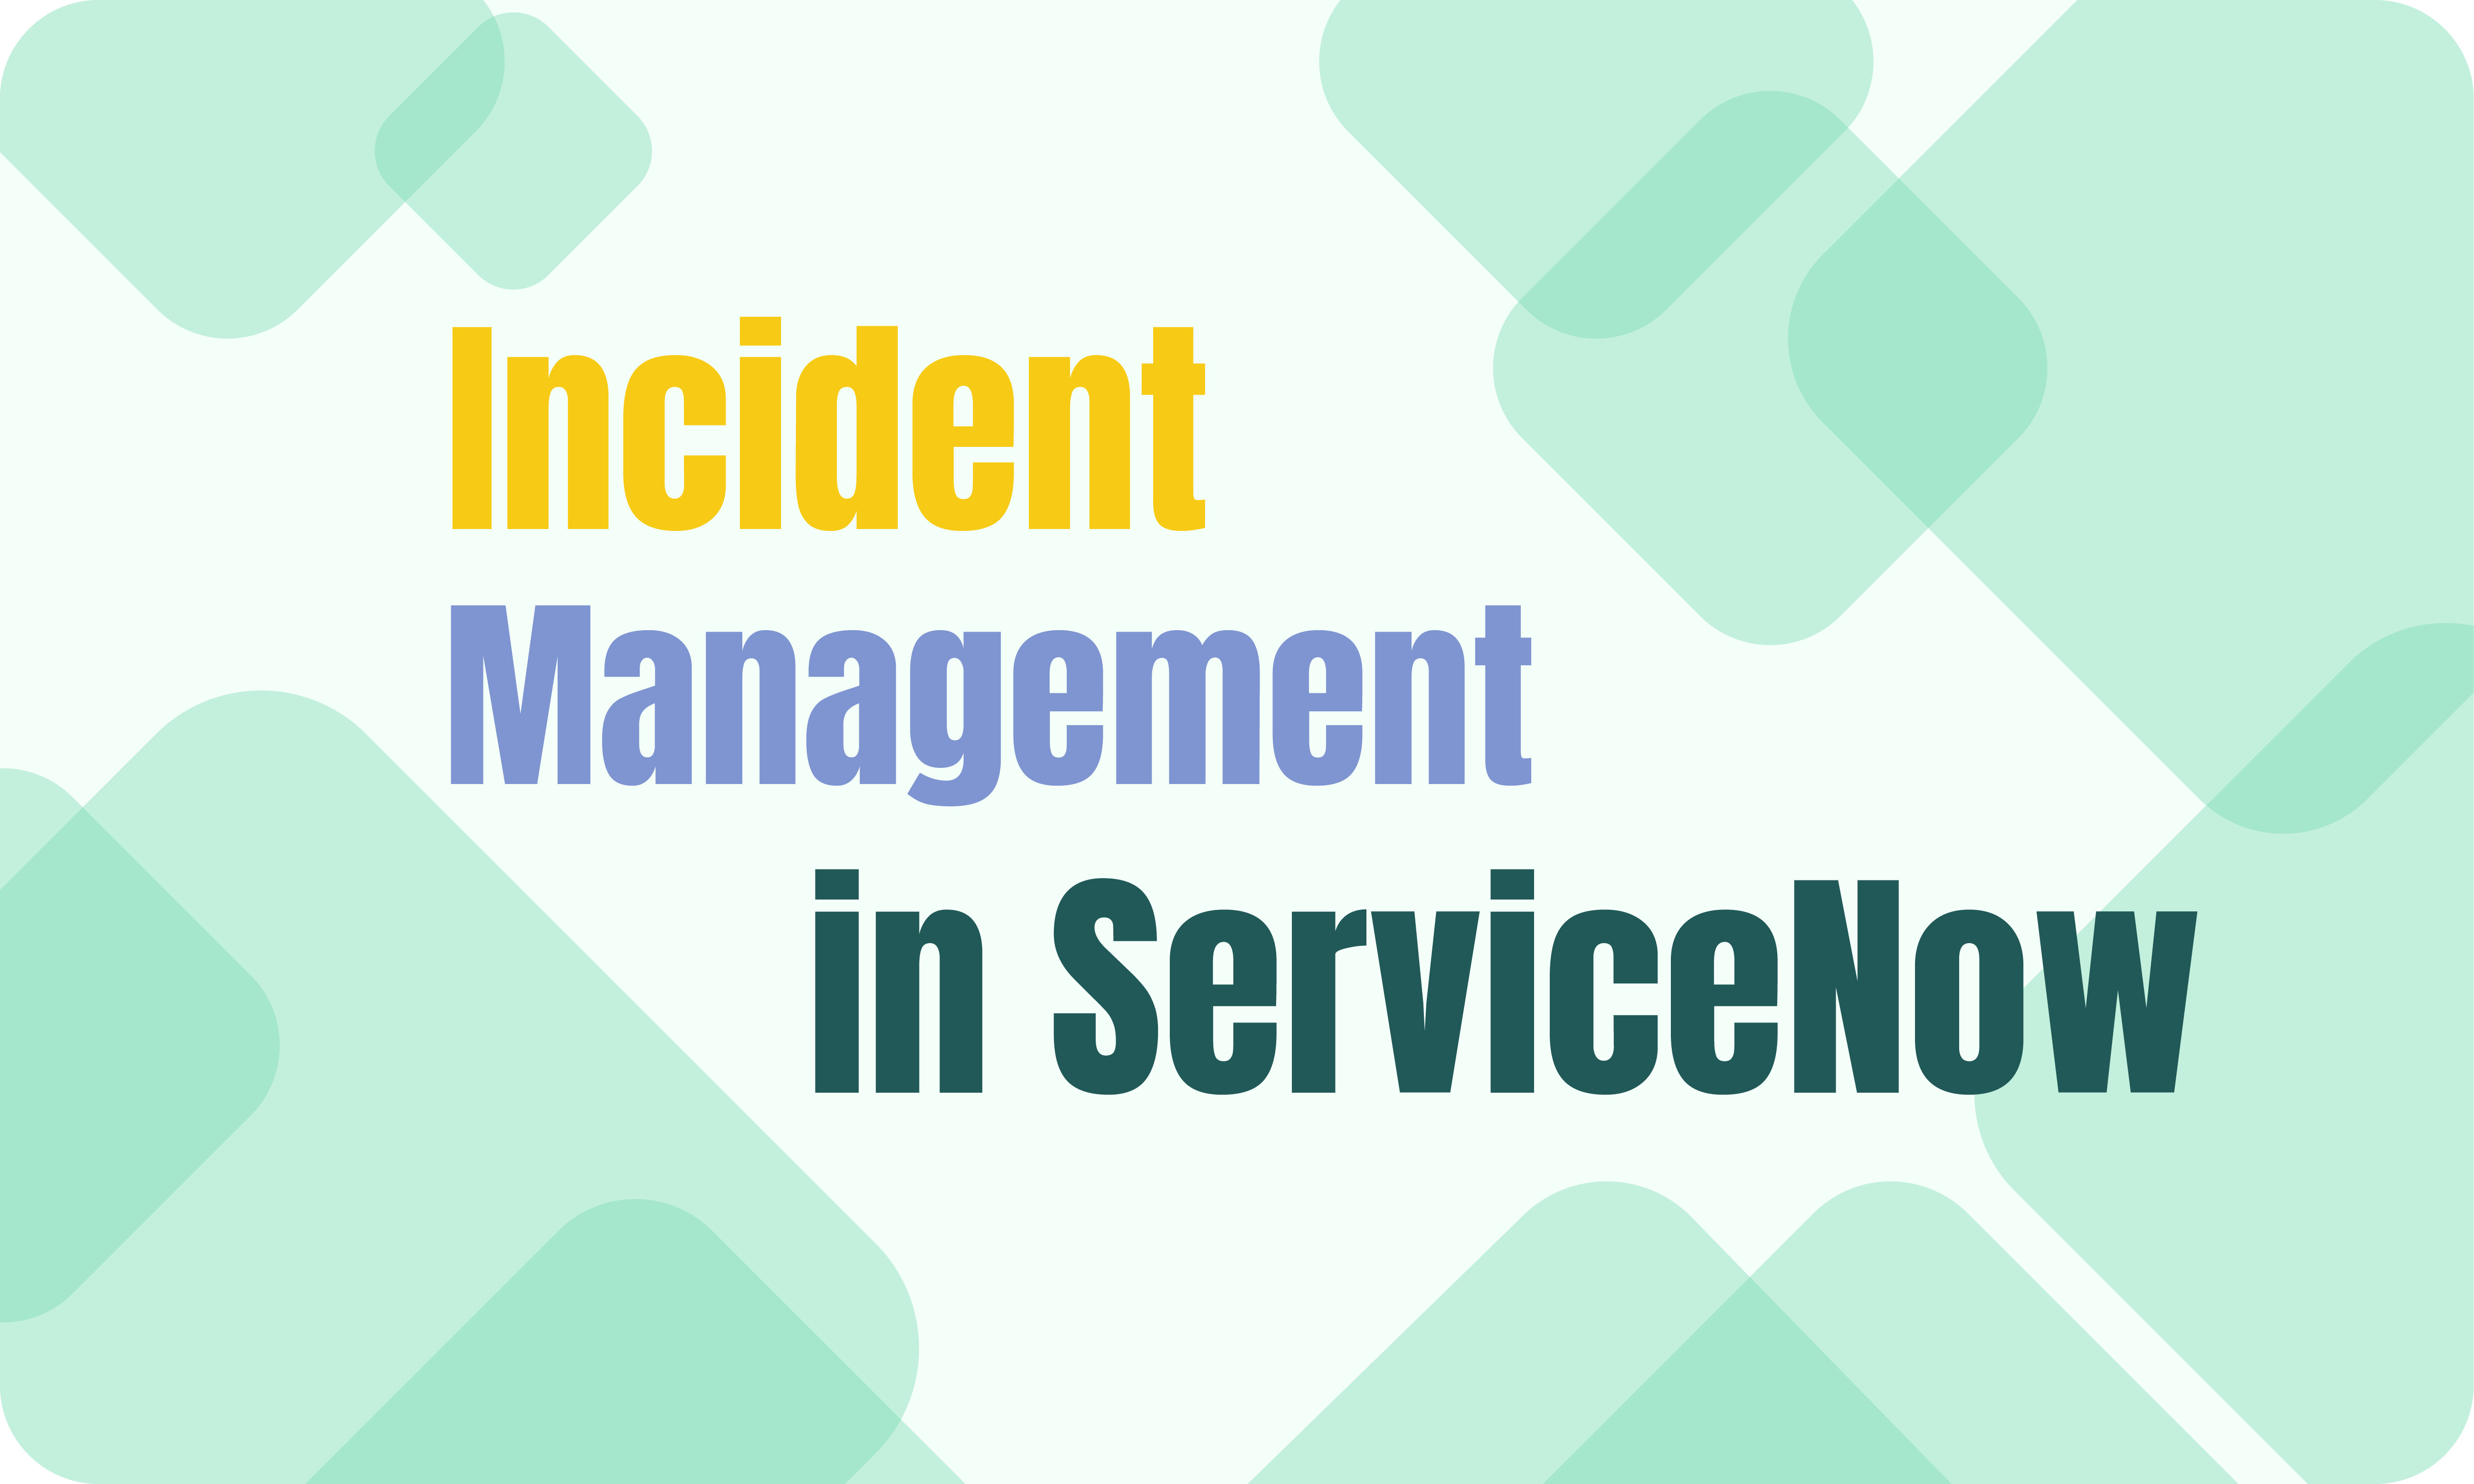 Everything About Incident Management in ServiceNow